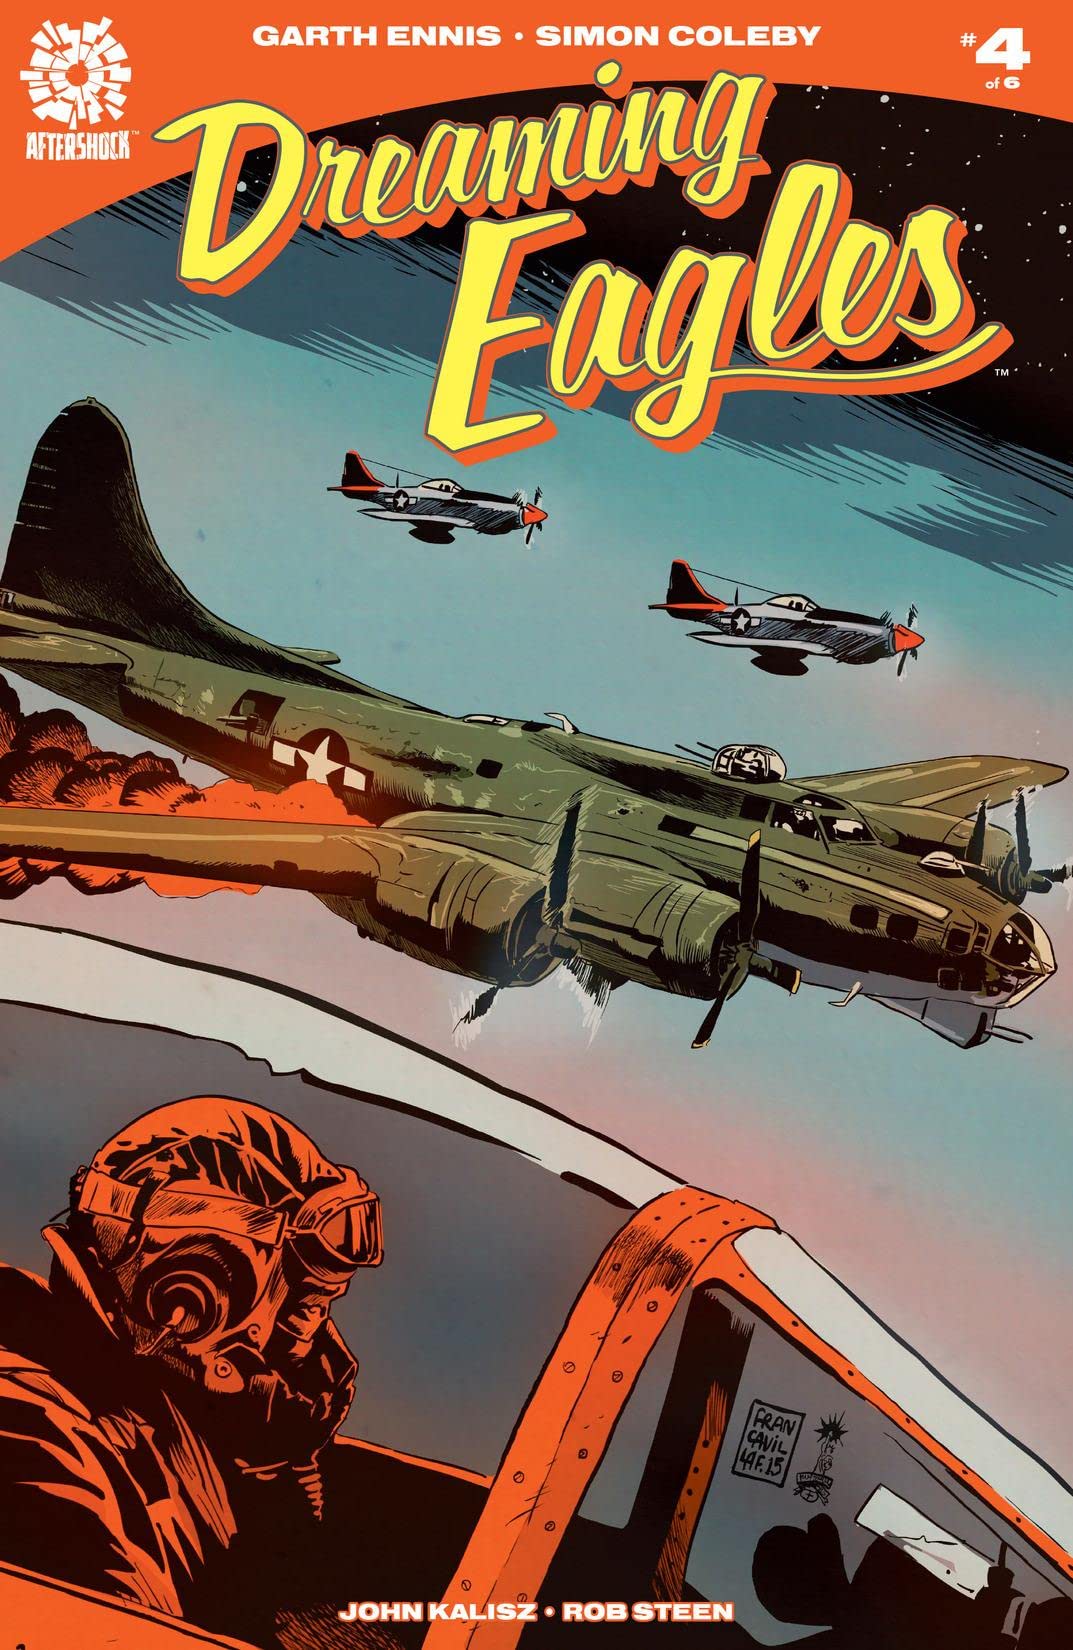 Dreaming Eagles #04